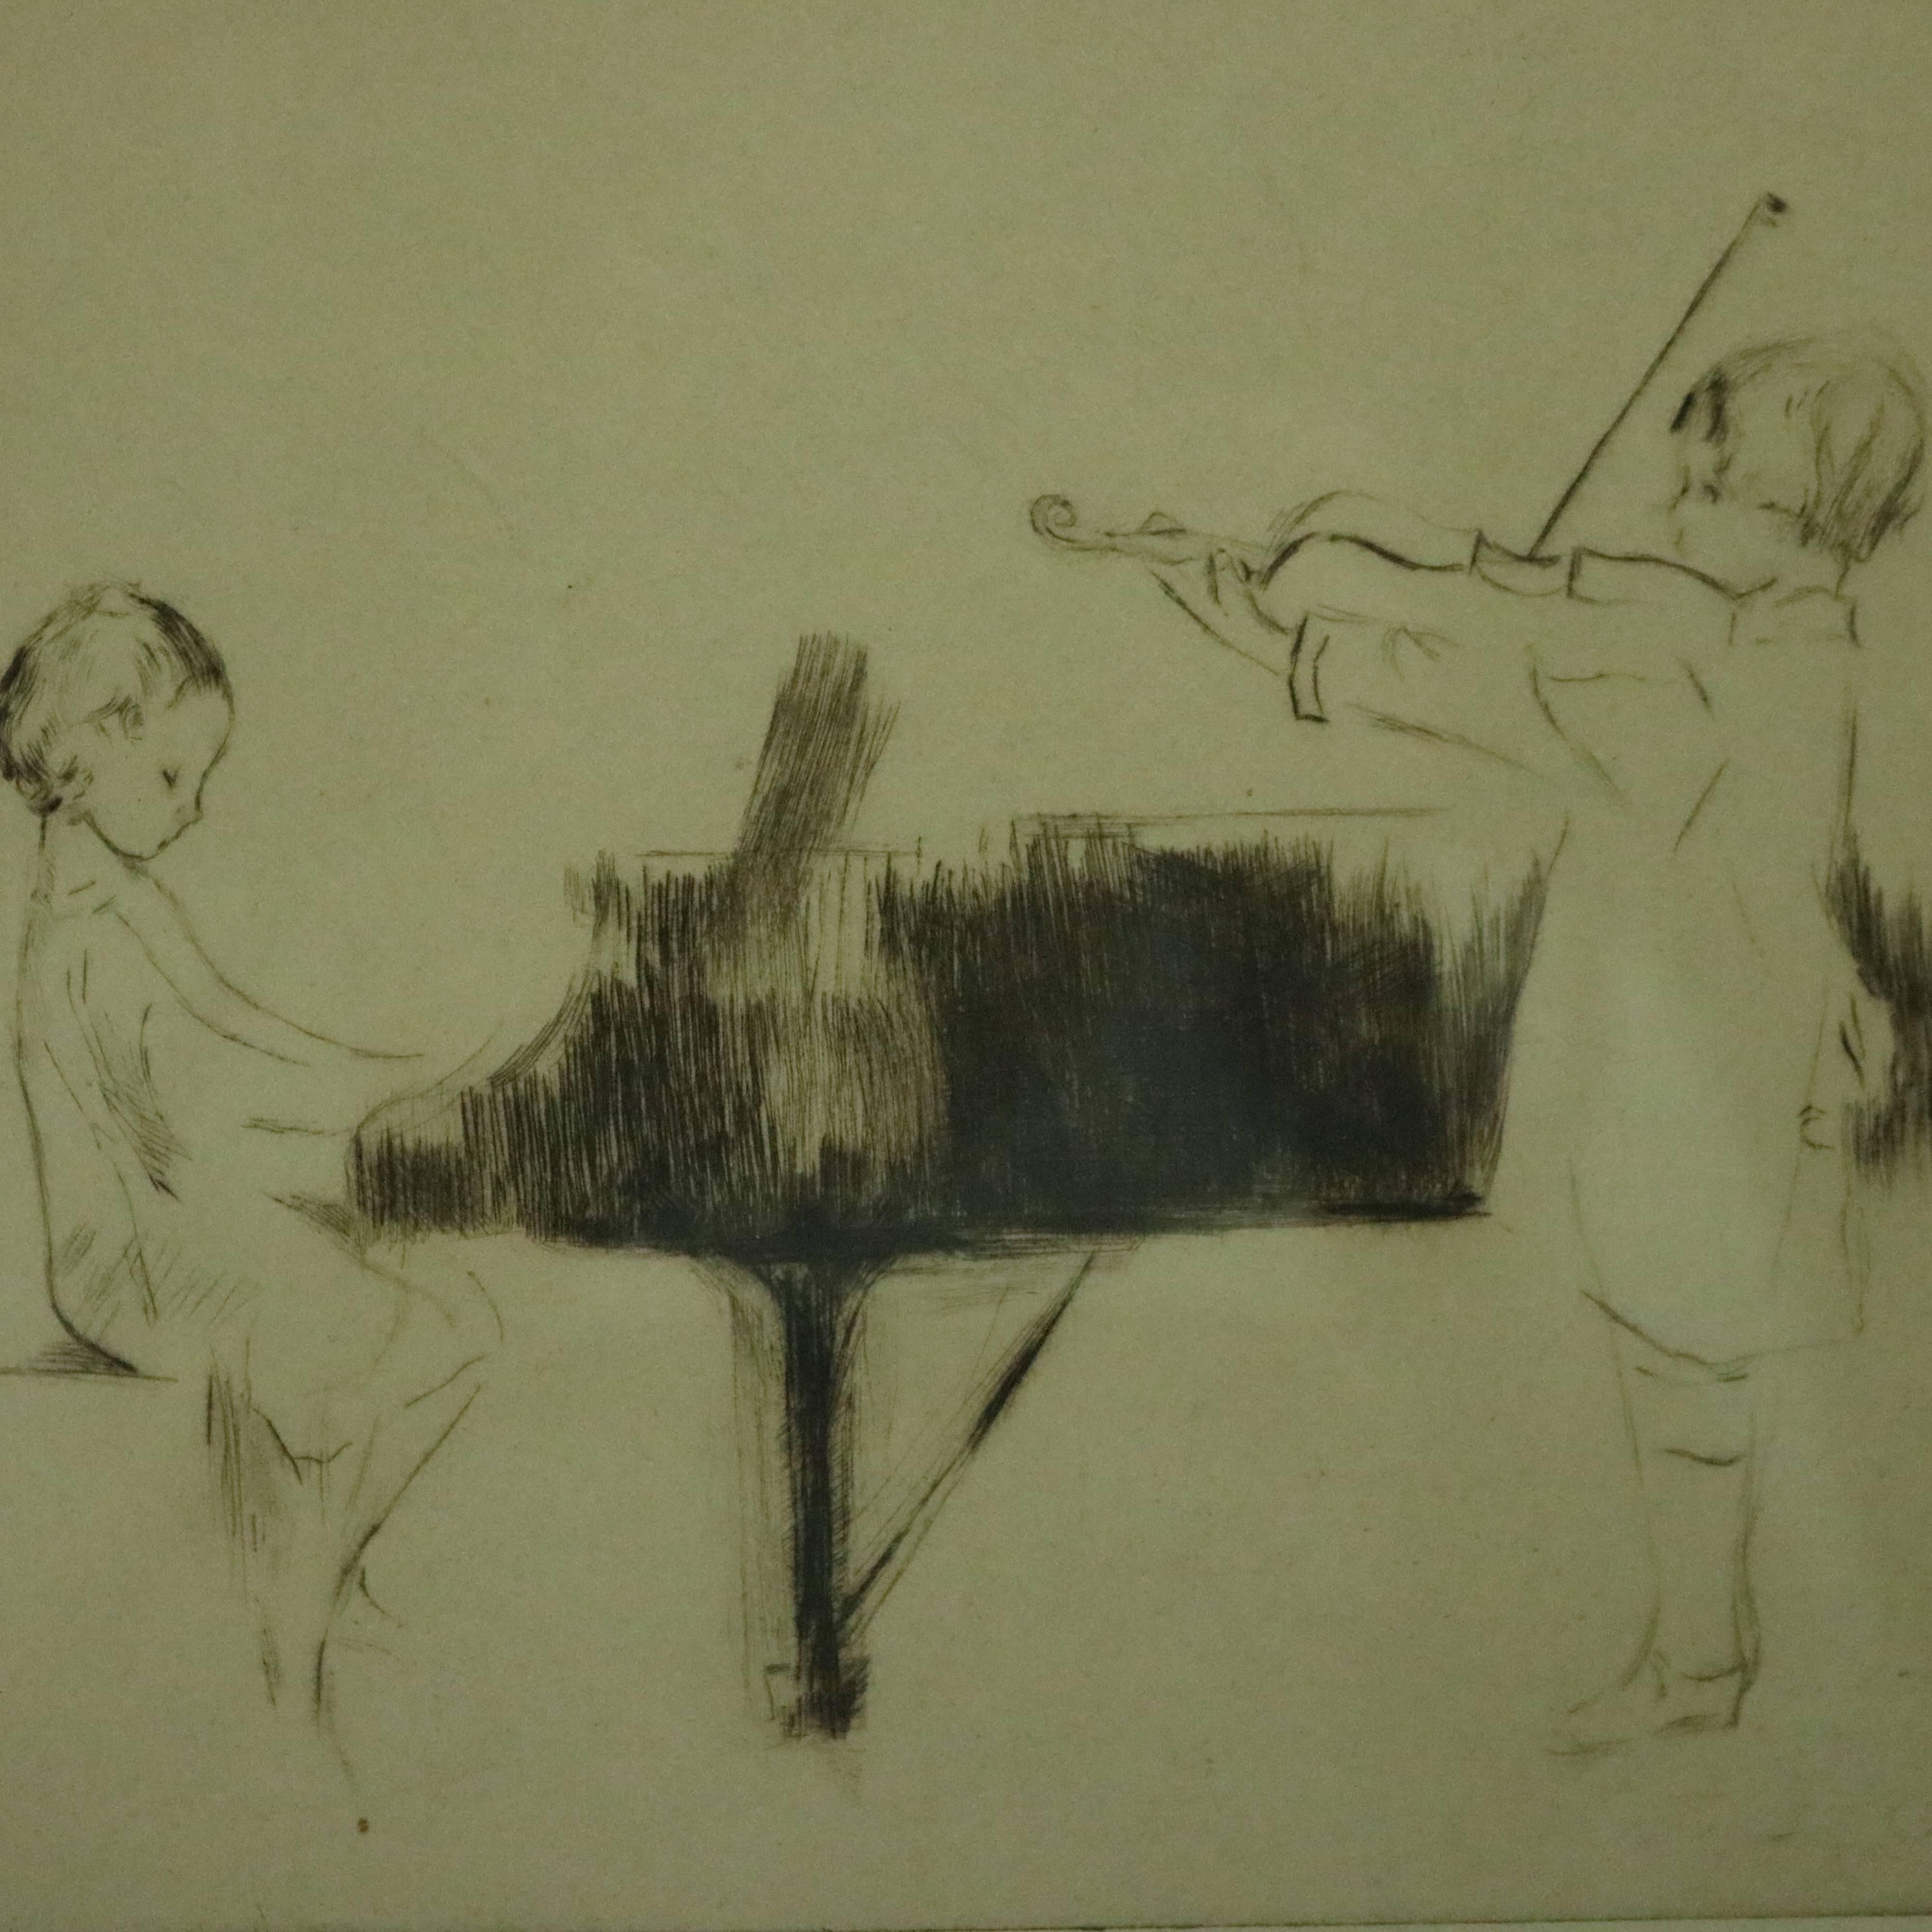 Antique original artist's proof dry point etching by Margery Ryerson (1886-1989) of children performing on grand piano and violin, titled lower left "The Hayden Sonata", signed lower right M. Ryerson, circa 1930.

Measures - 14.5" H